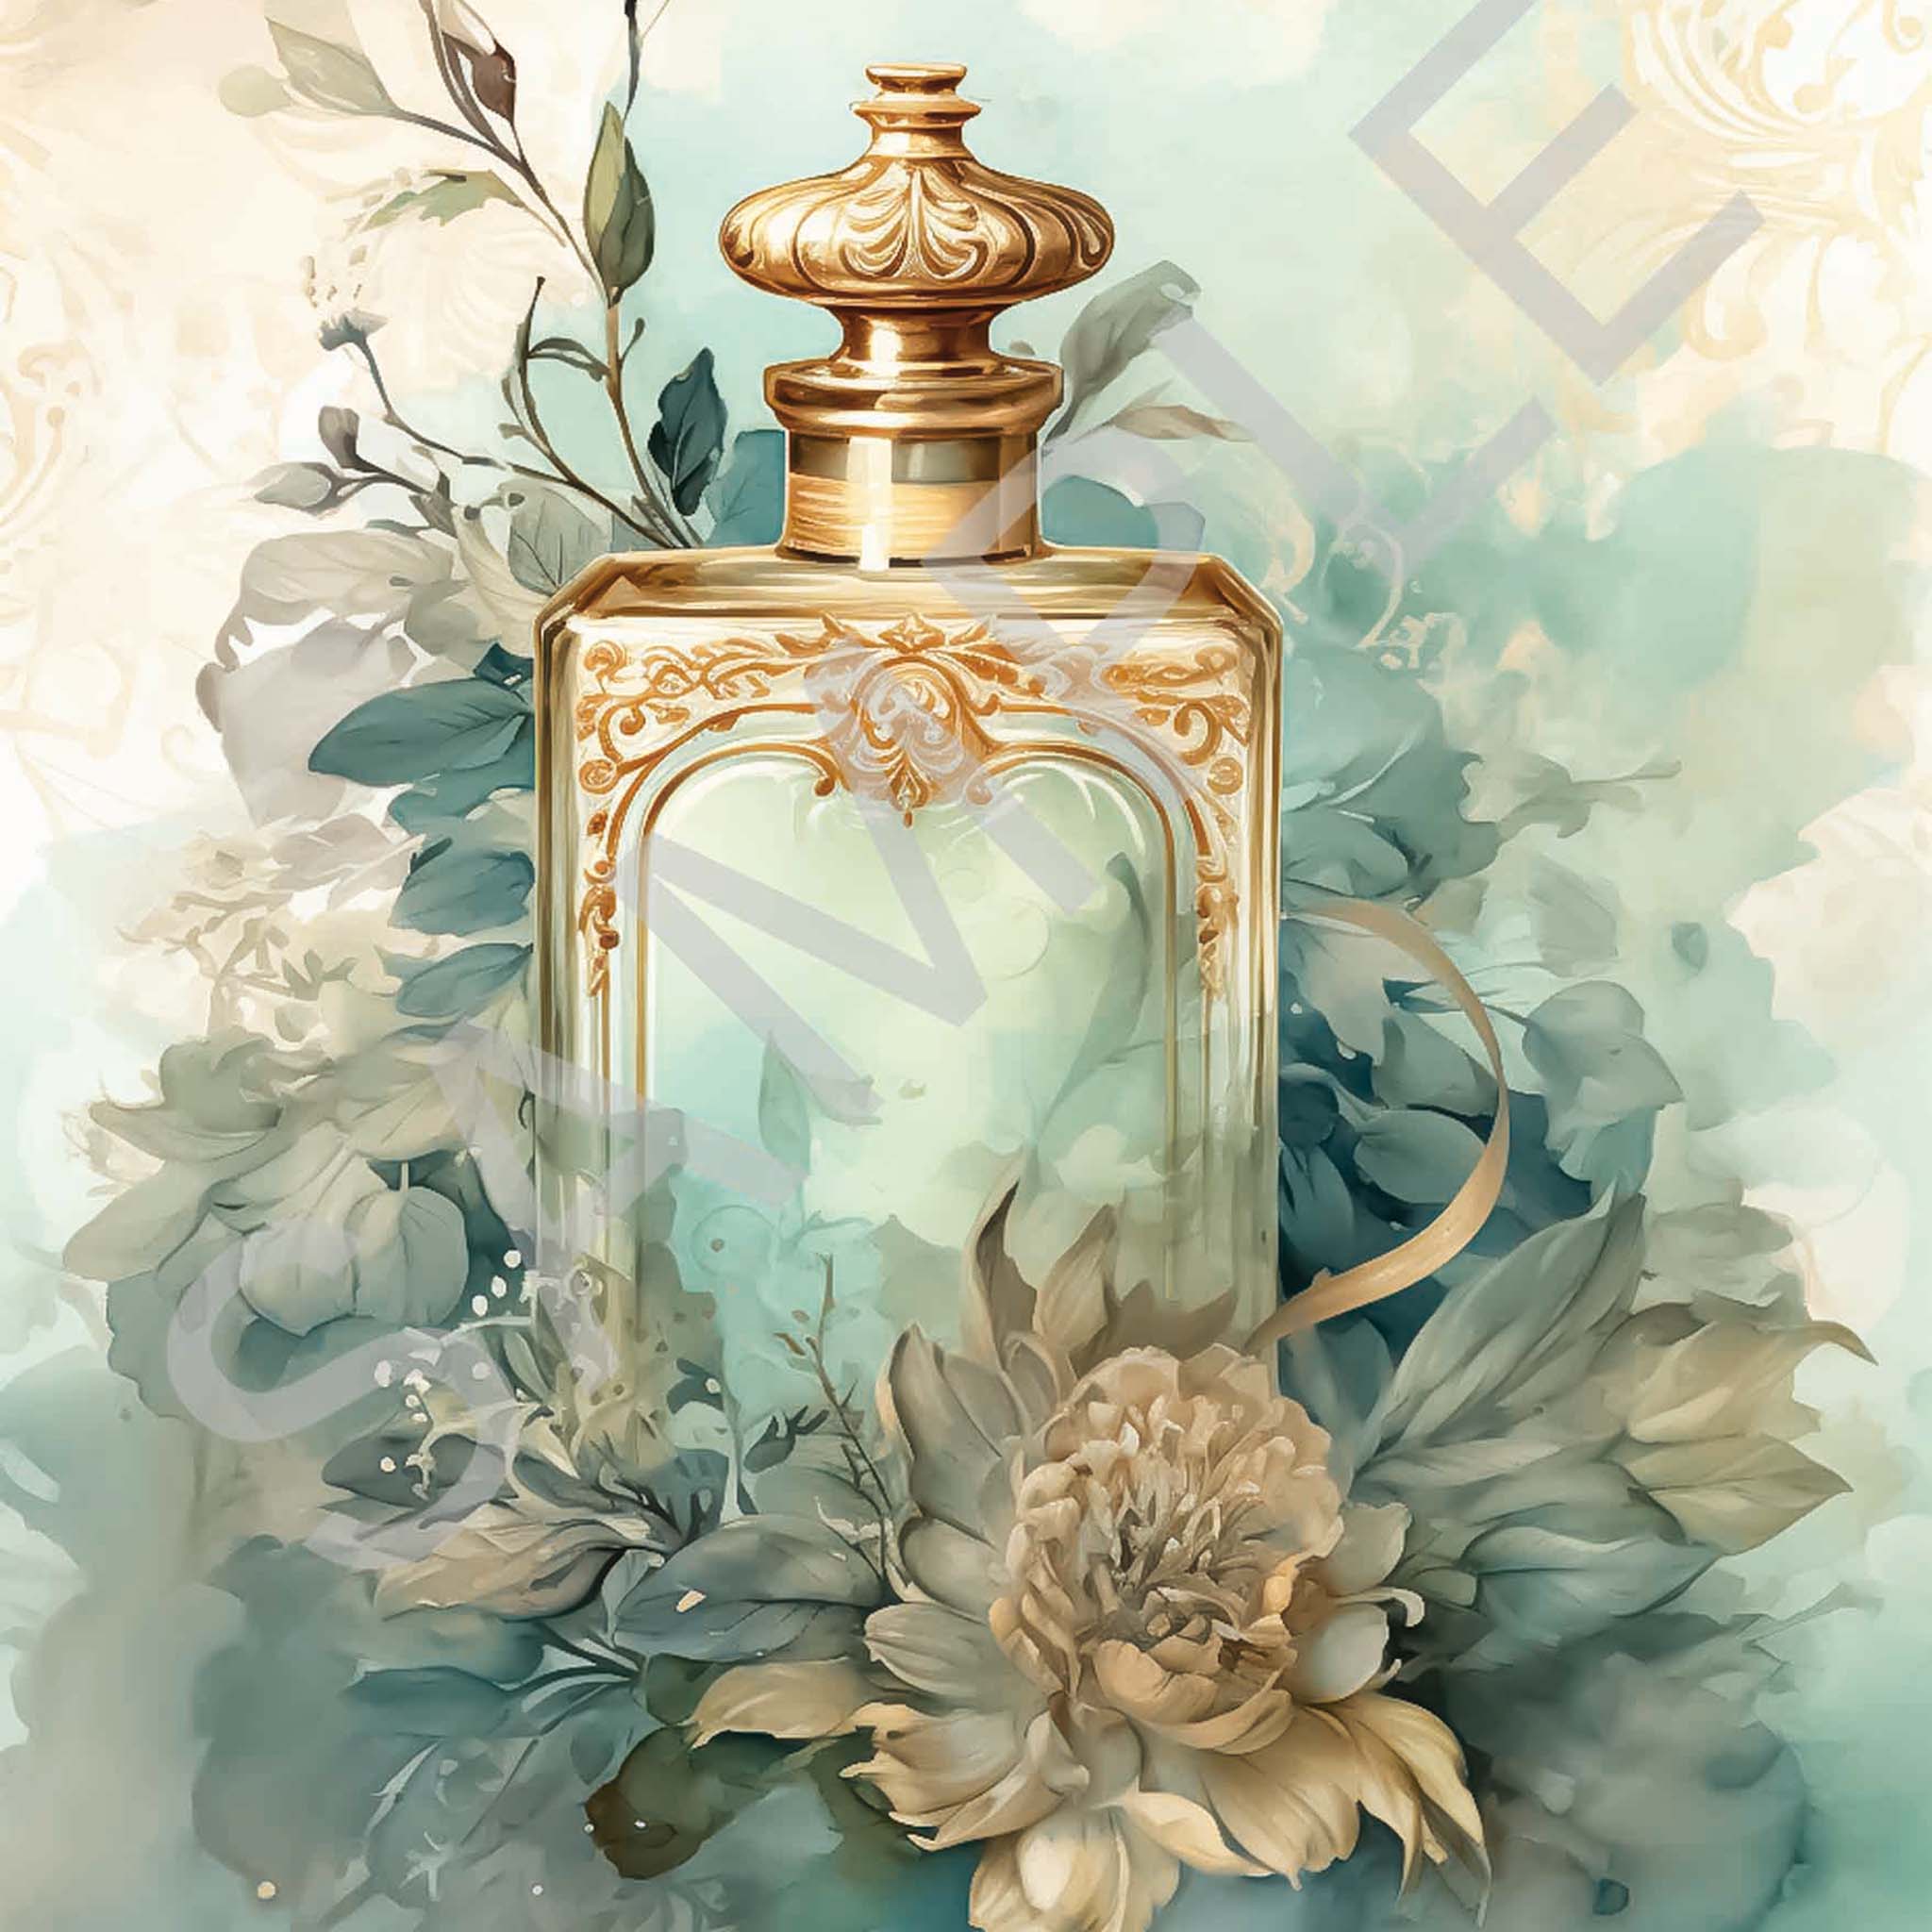 Close-up of an A4 rice paper that features a vintage perfume bottle nestled among beautiful flowers on a dreamy background with hints of gold.